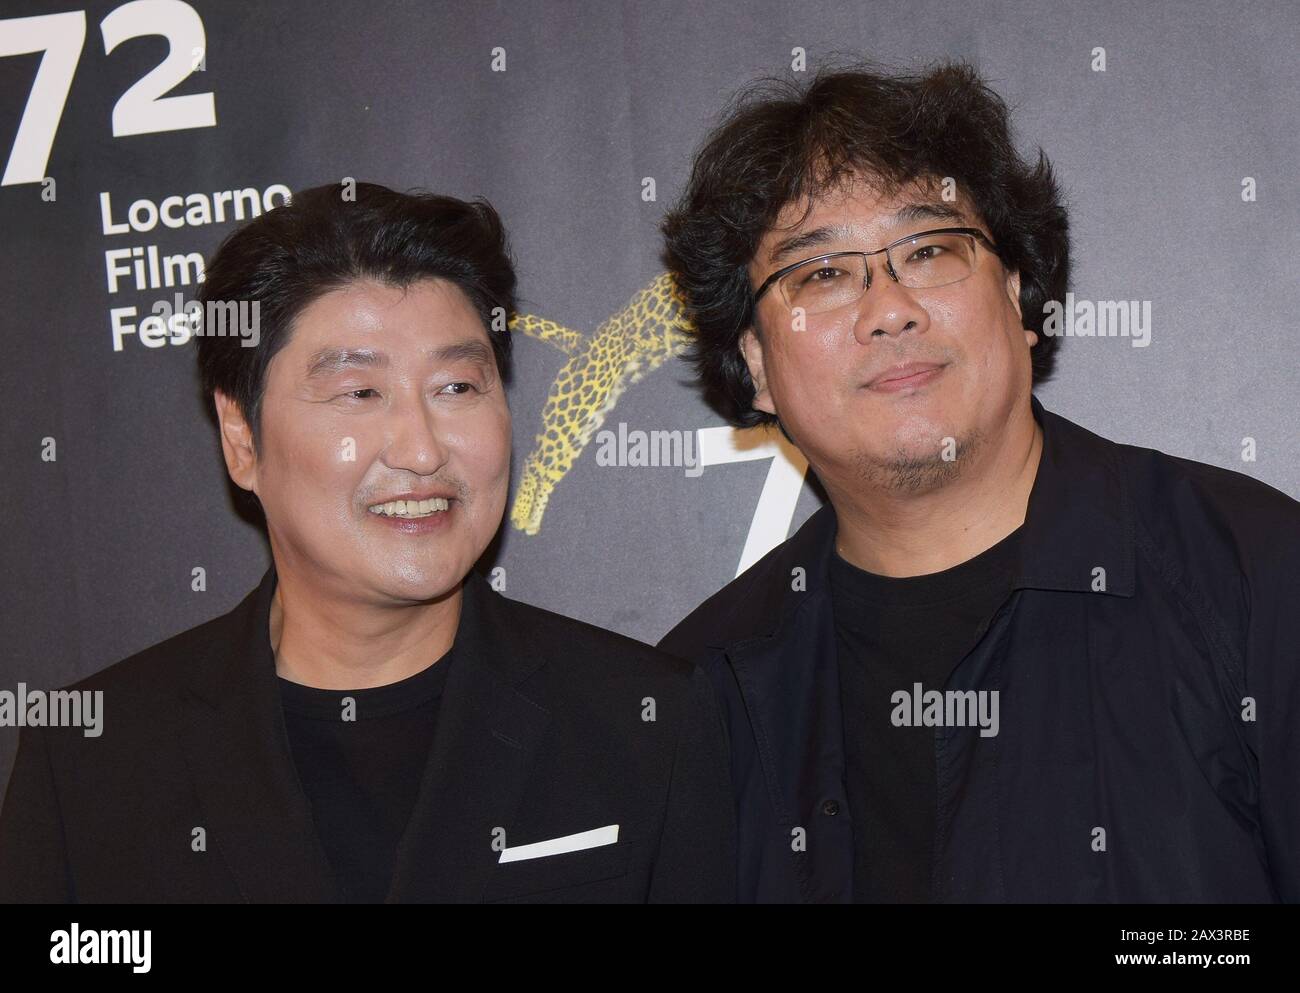 Milan, Italy. 10th Feb, 2020. Locarno, Switzerland Locarno Film Festival 2019 Switzerland, Red carpet For the film Parasite by director BONG Joon-ho, SONG Kang-ho actor receives the Excellence Award. Pictured: director BONG Joon-ho, SONG Kang-ho actor Credit: Independent Photo Agency/Alamy Live News Stock Photo